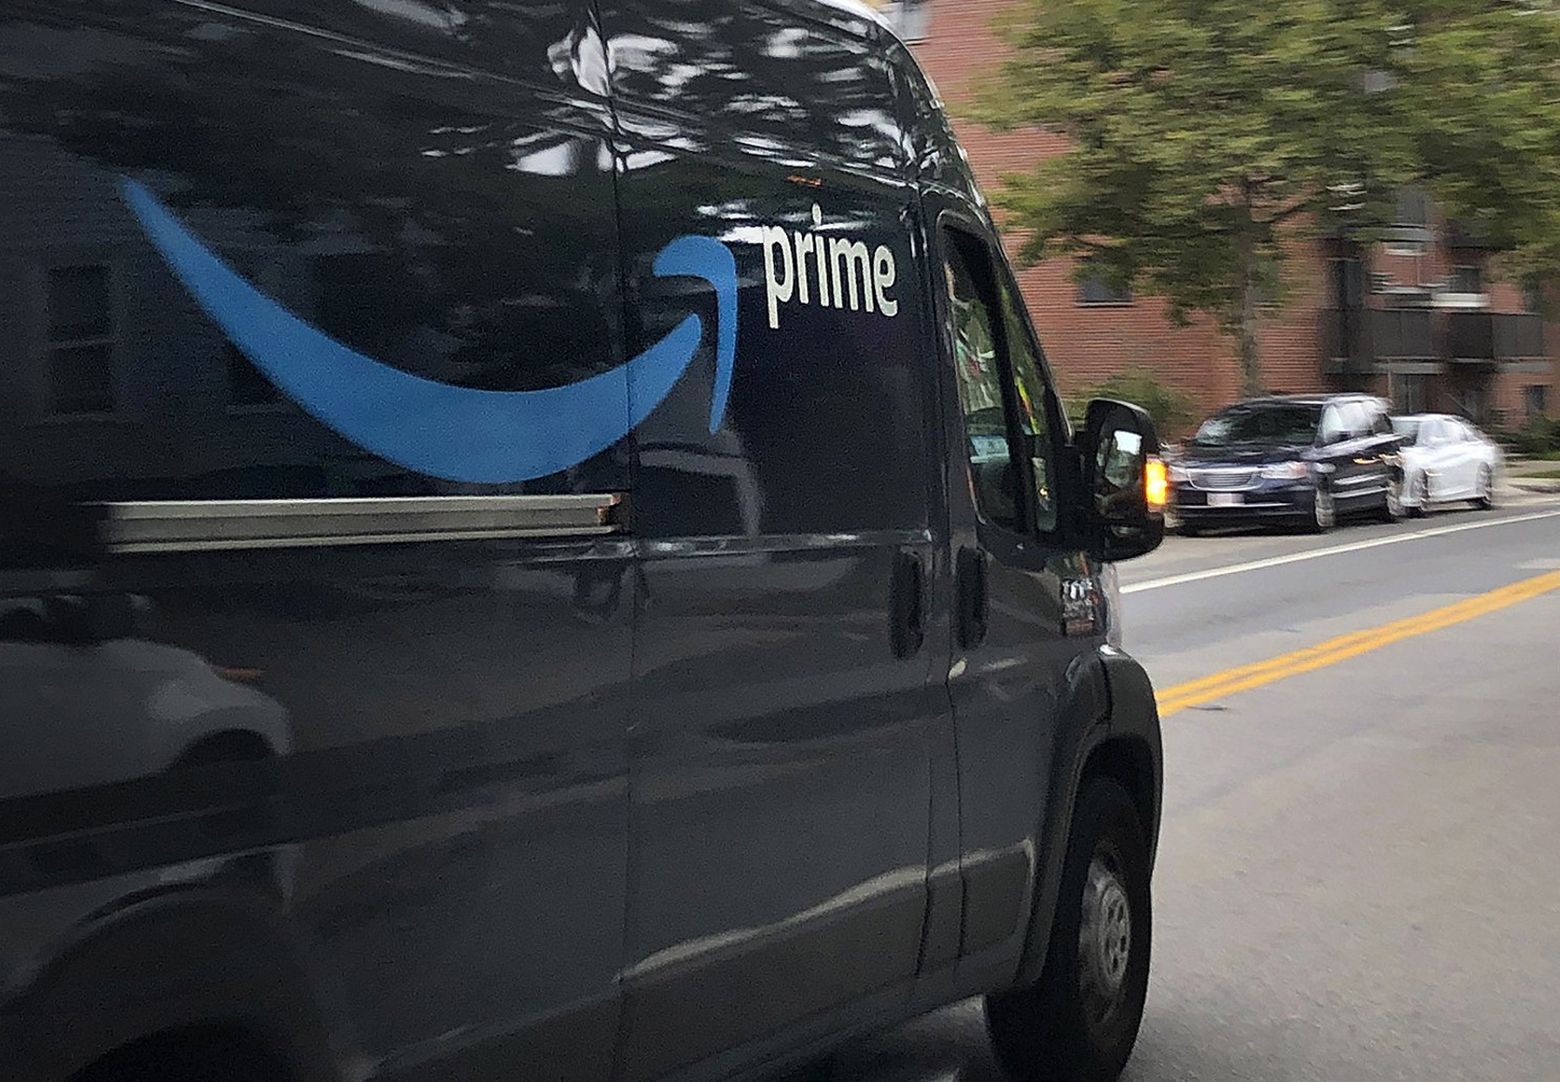 Amazon Delivery Drivers Scoff At Company S Claim That Workers Don T Urinate In Bottles The Seattle Times